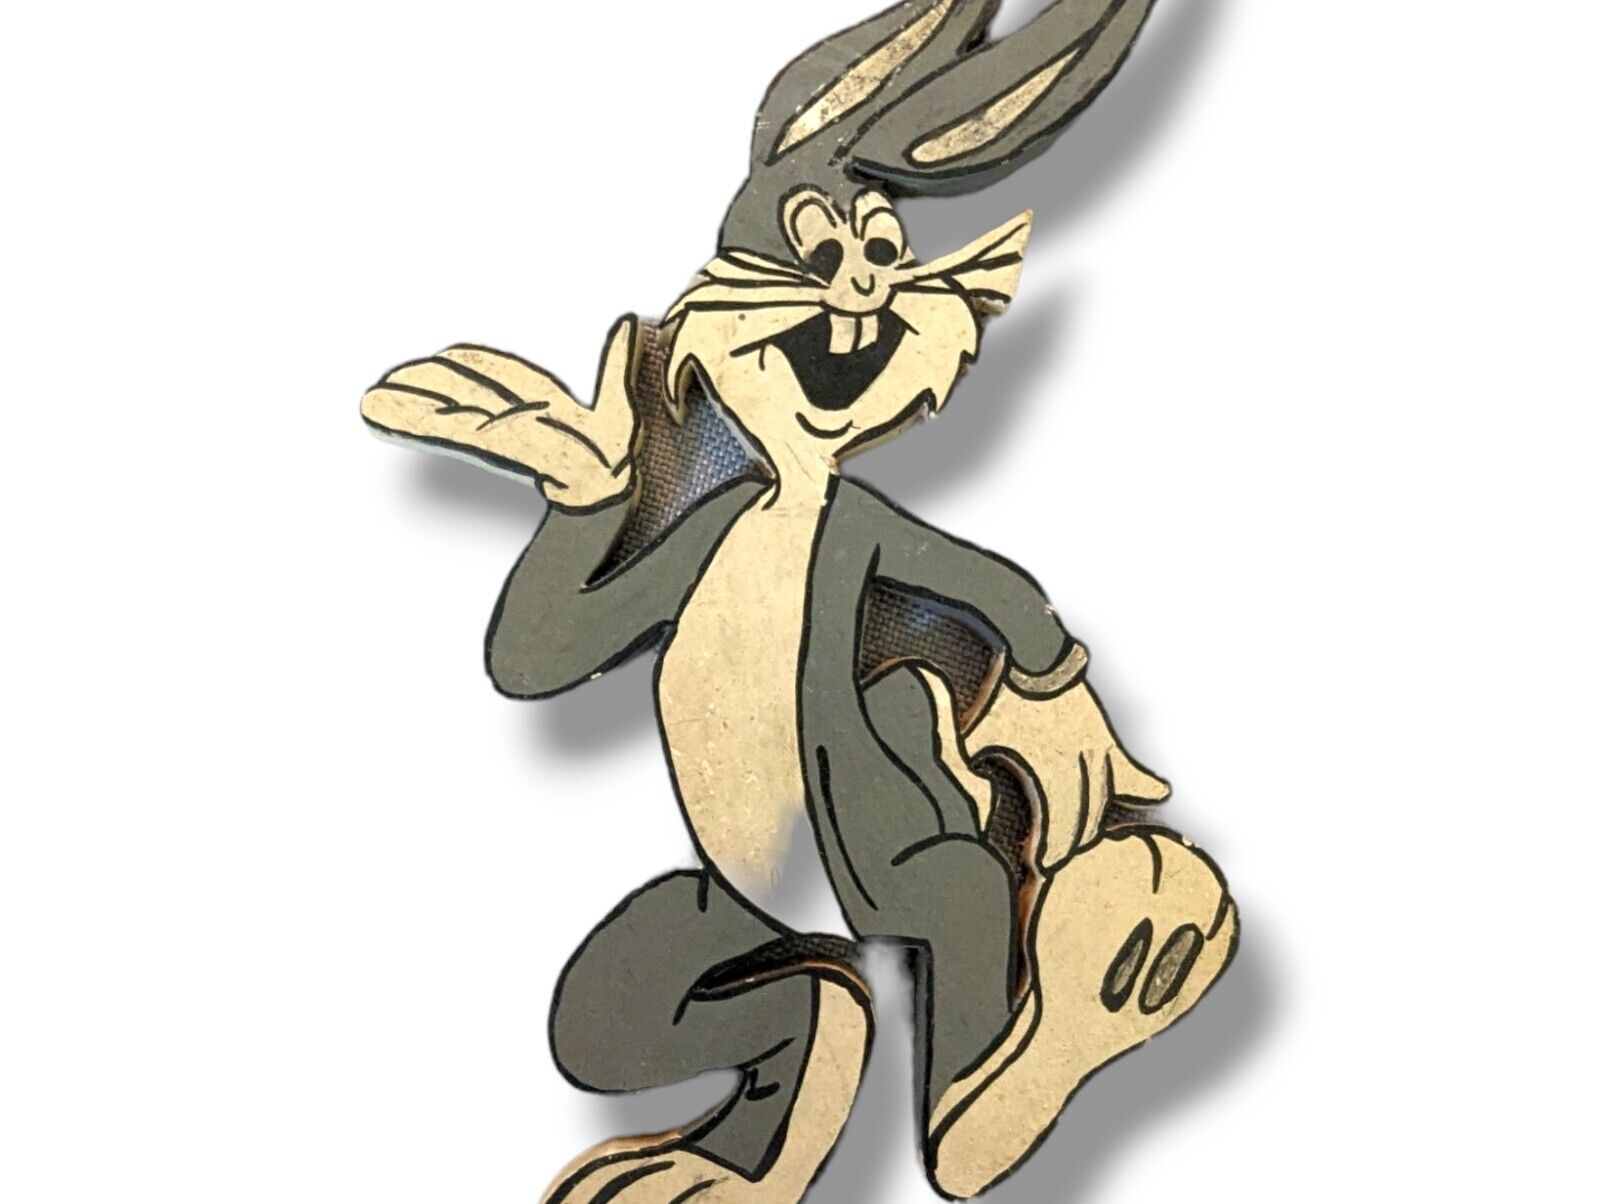 Bugs Bunny Handmade Wooden Tramp Art Cutout 7 And 1/2 In Tall